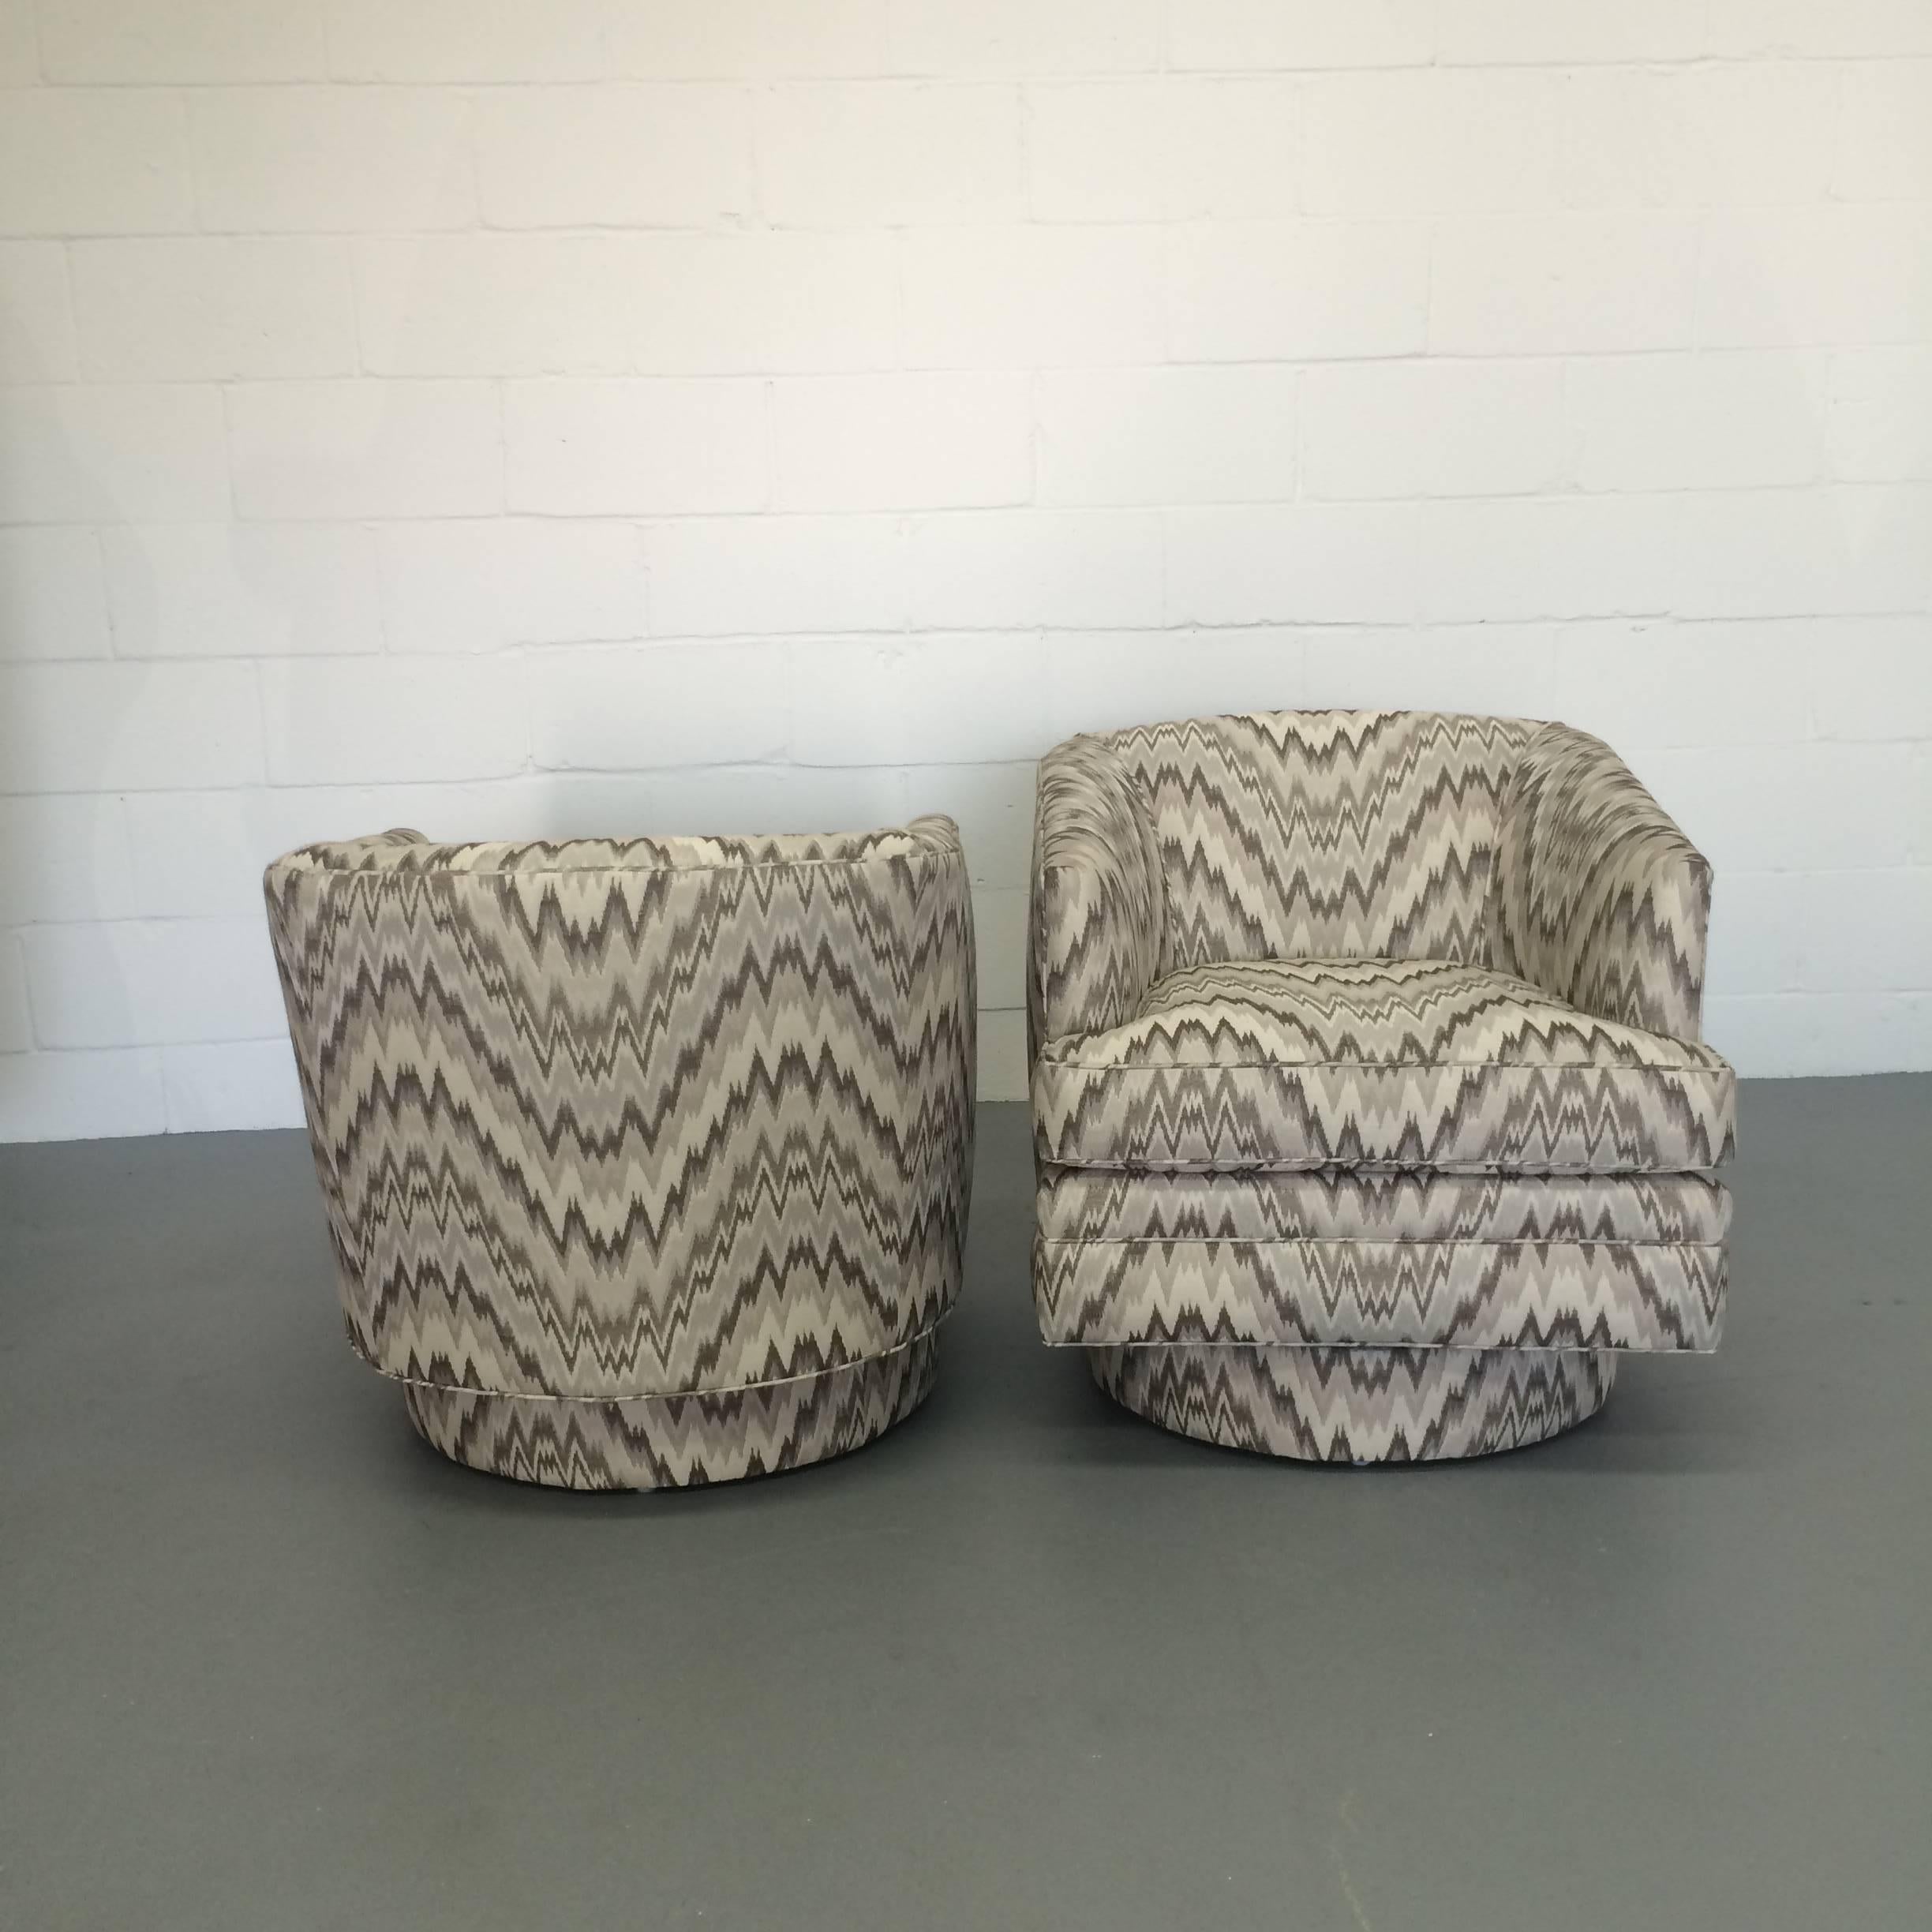 A very special pair of freshly upholstered Mid-Century Modern swivel club chairs in a chevron print in hues of grays and creams. The pattern of the fabric is matching from the top all the way to the bottom of the plinth base. A wonderful size and